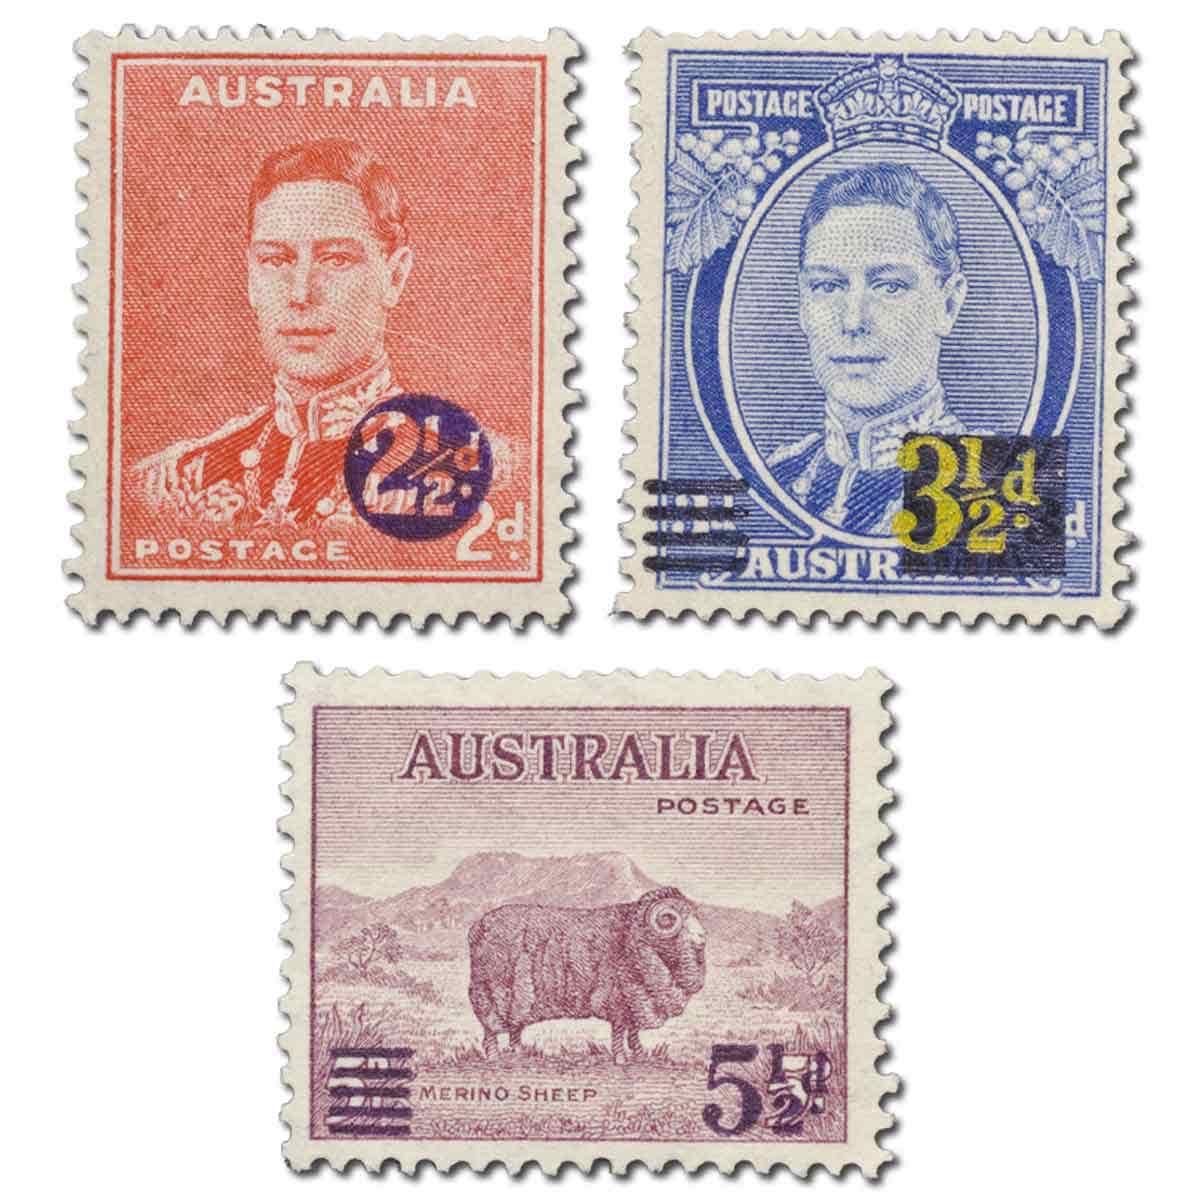 1941 Surcharges Trio Mint Unhinged